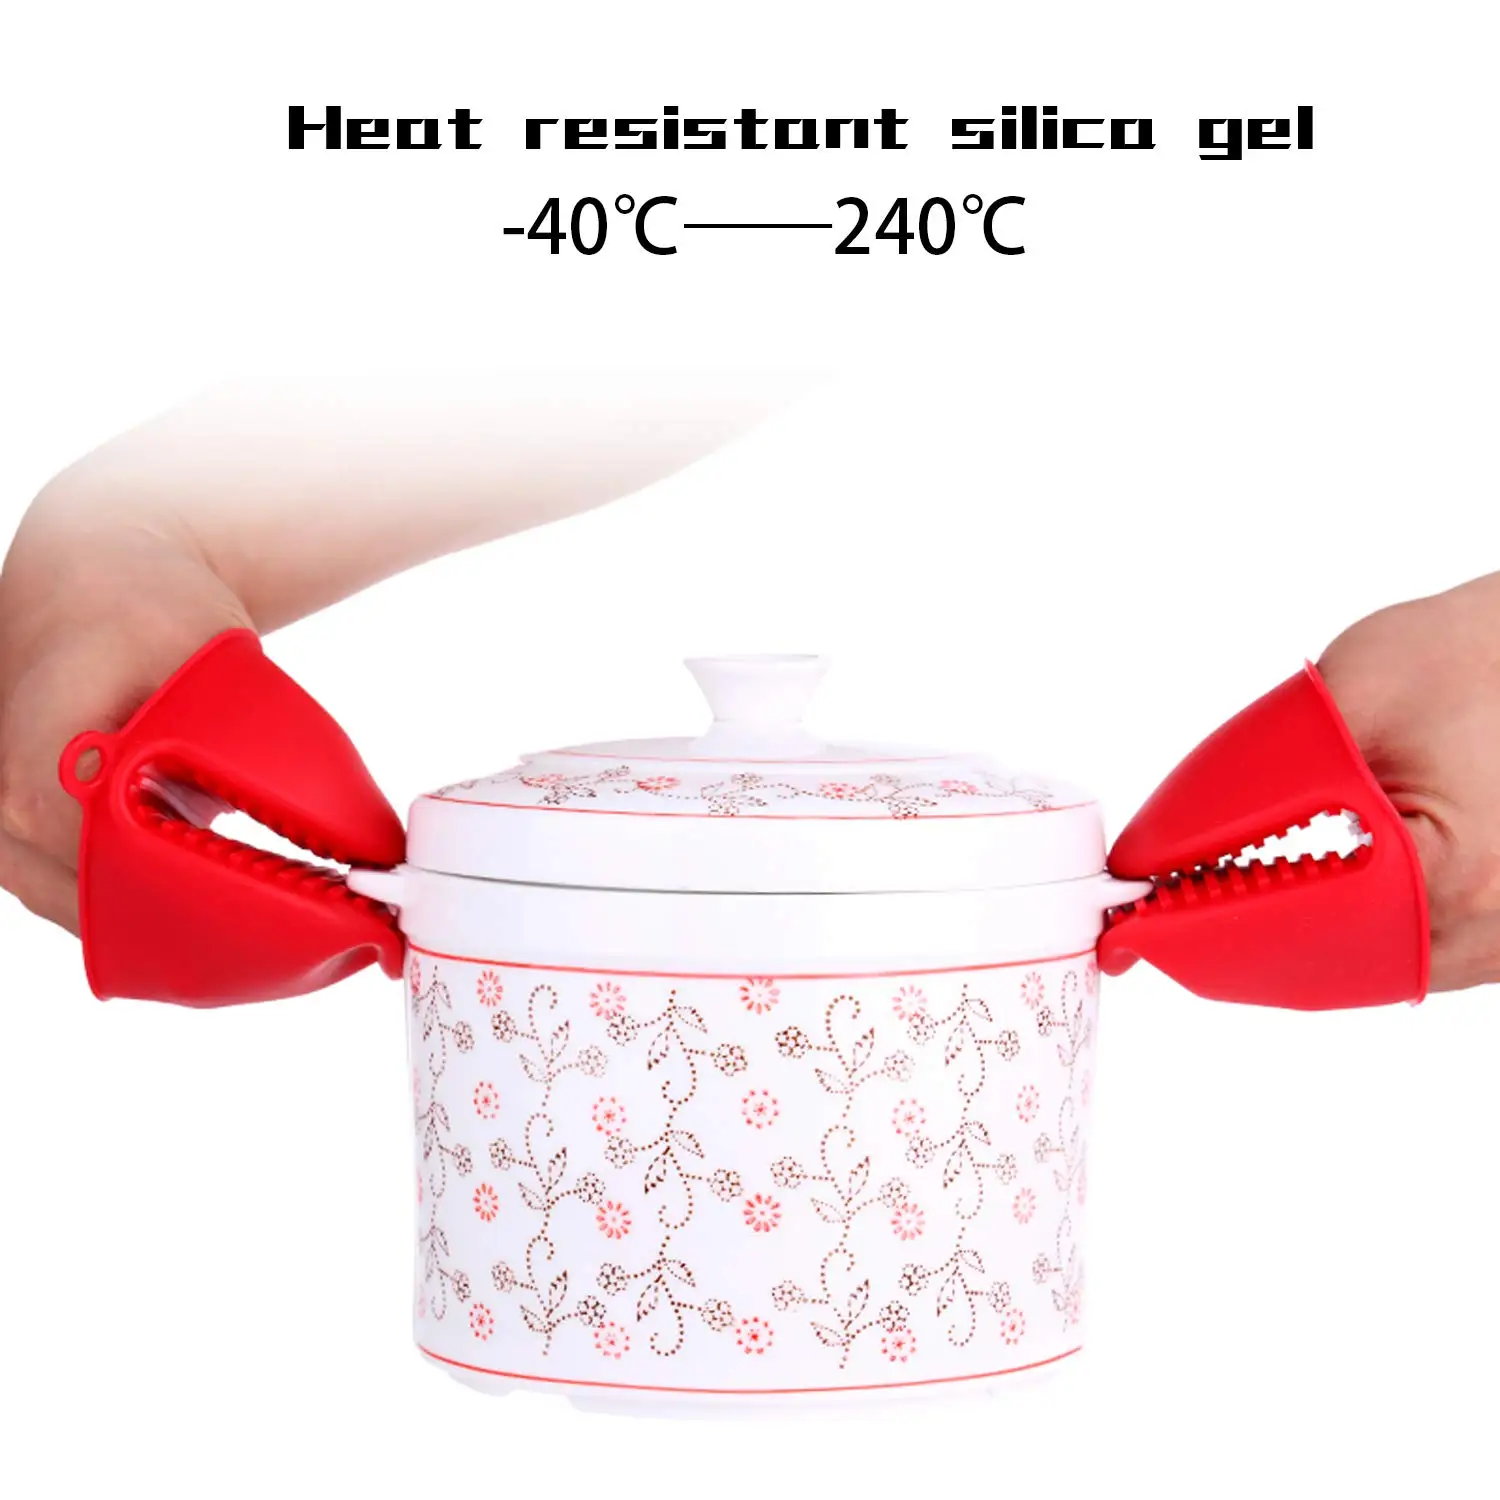 Modern Printed Silicone Cooking Pinch Grips Oven Mitts & Potholder for Kitchen BBQ & Grill for Food Restaurants